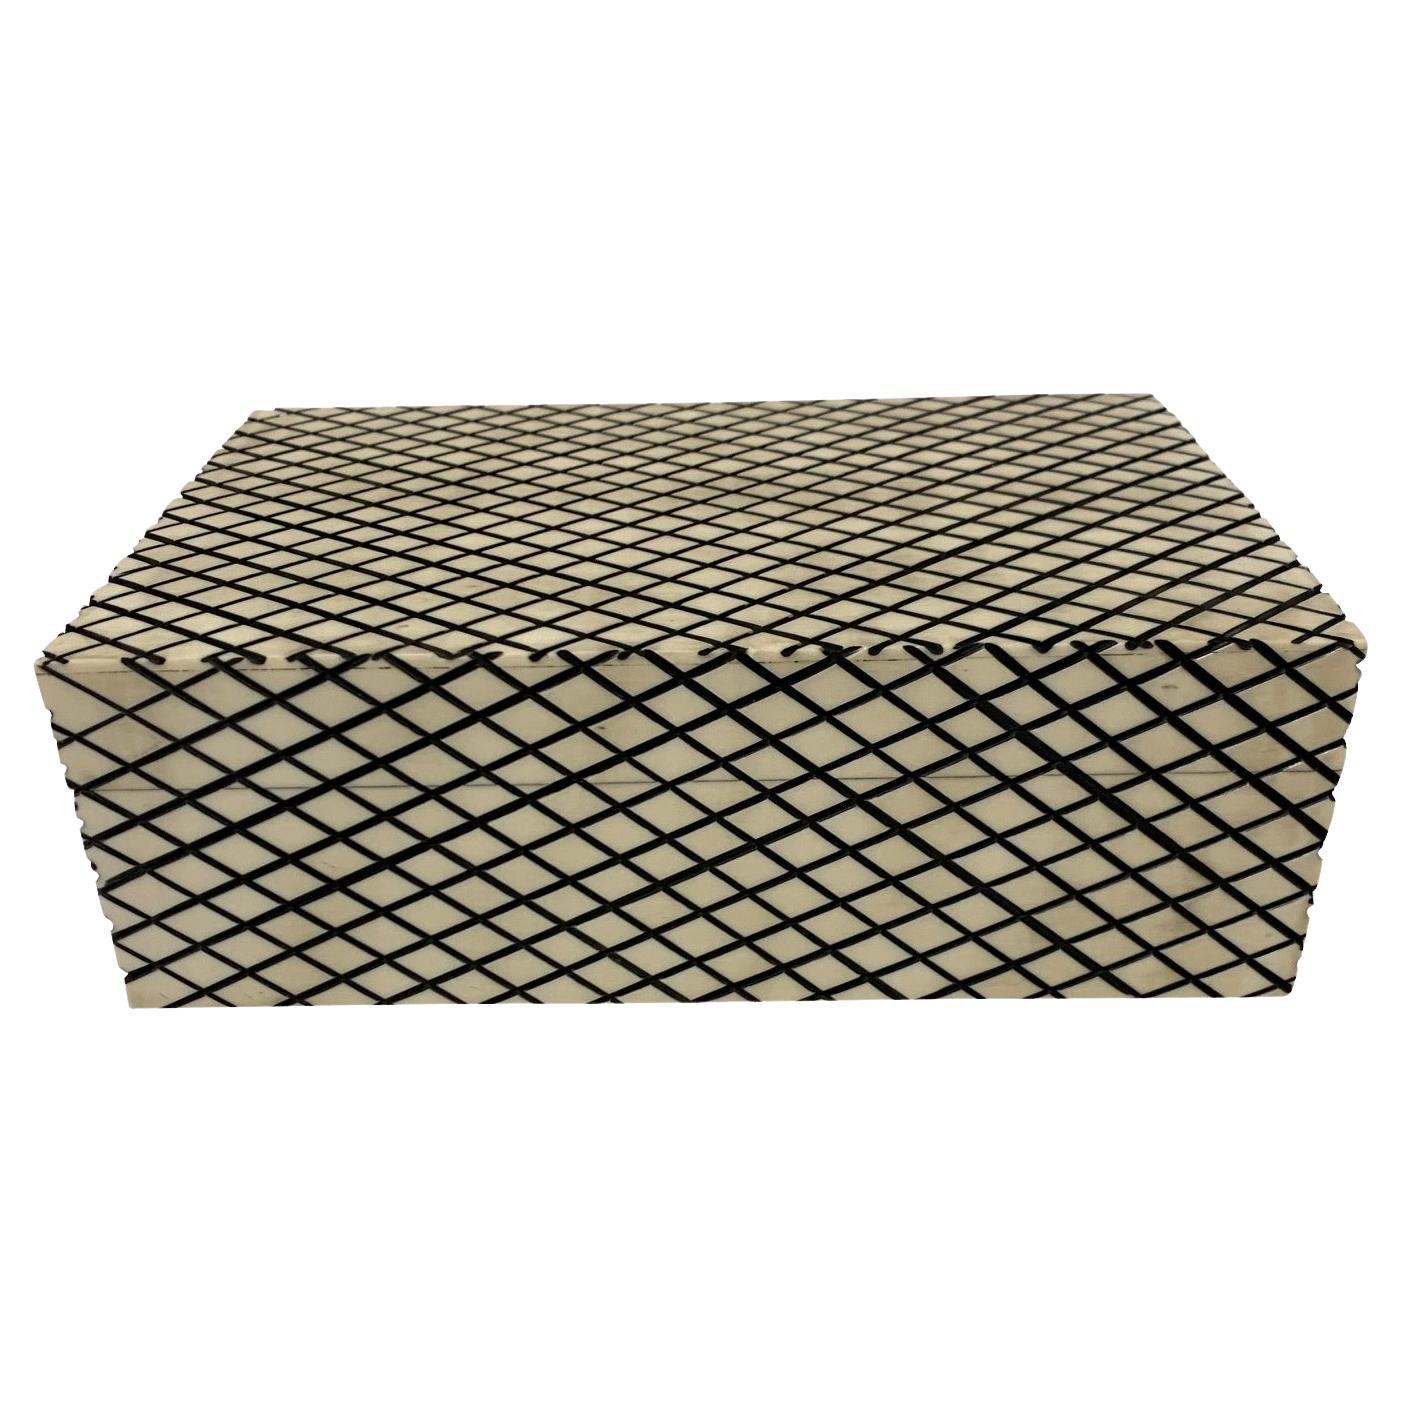 Black And Cream Etched Diamond Pattern Lidded Bone Box, India, Contemporary